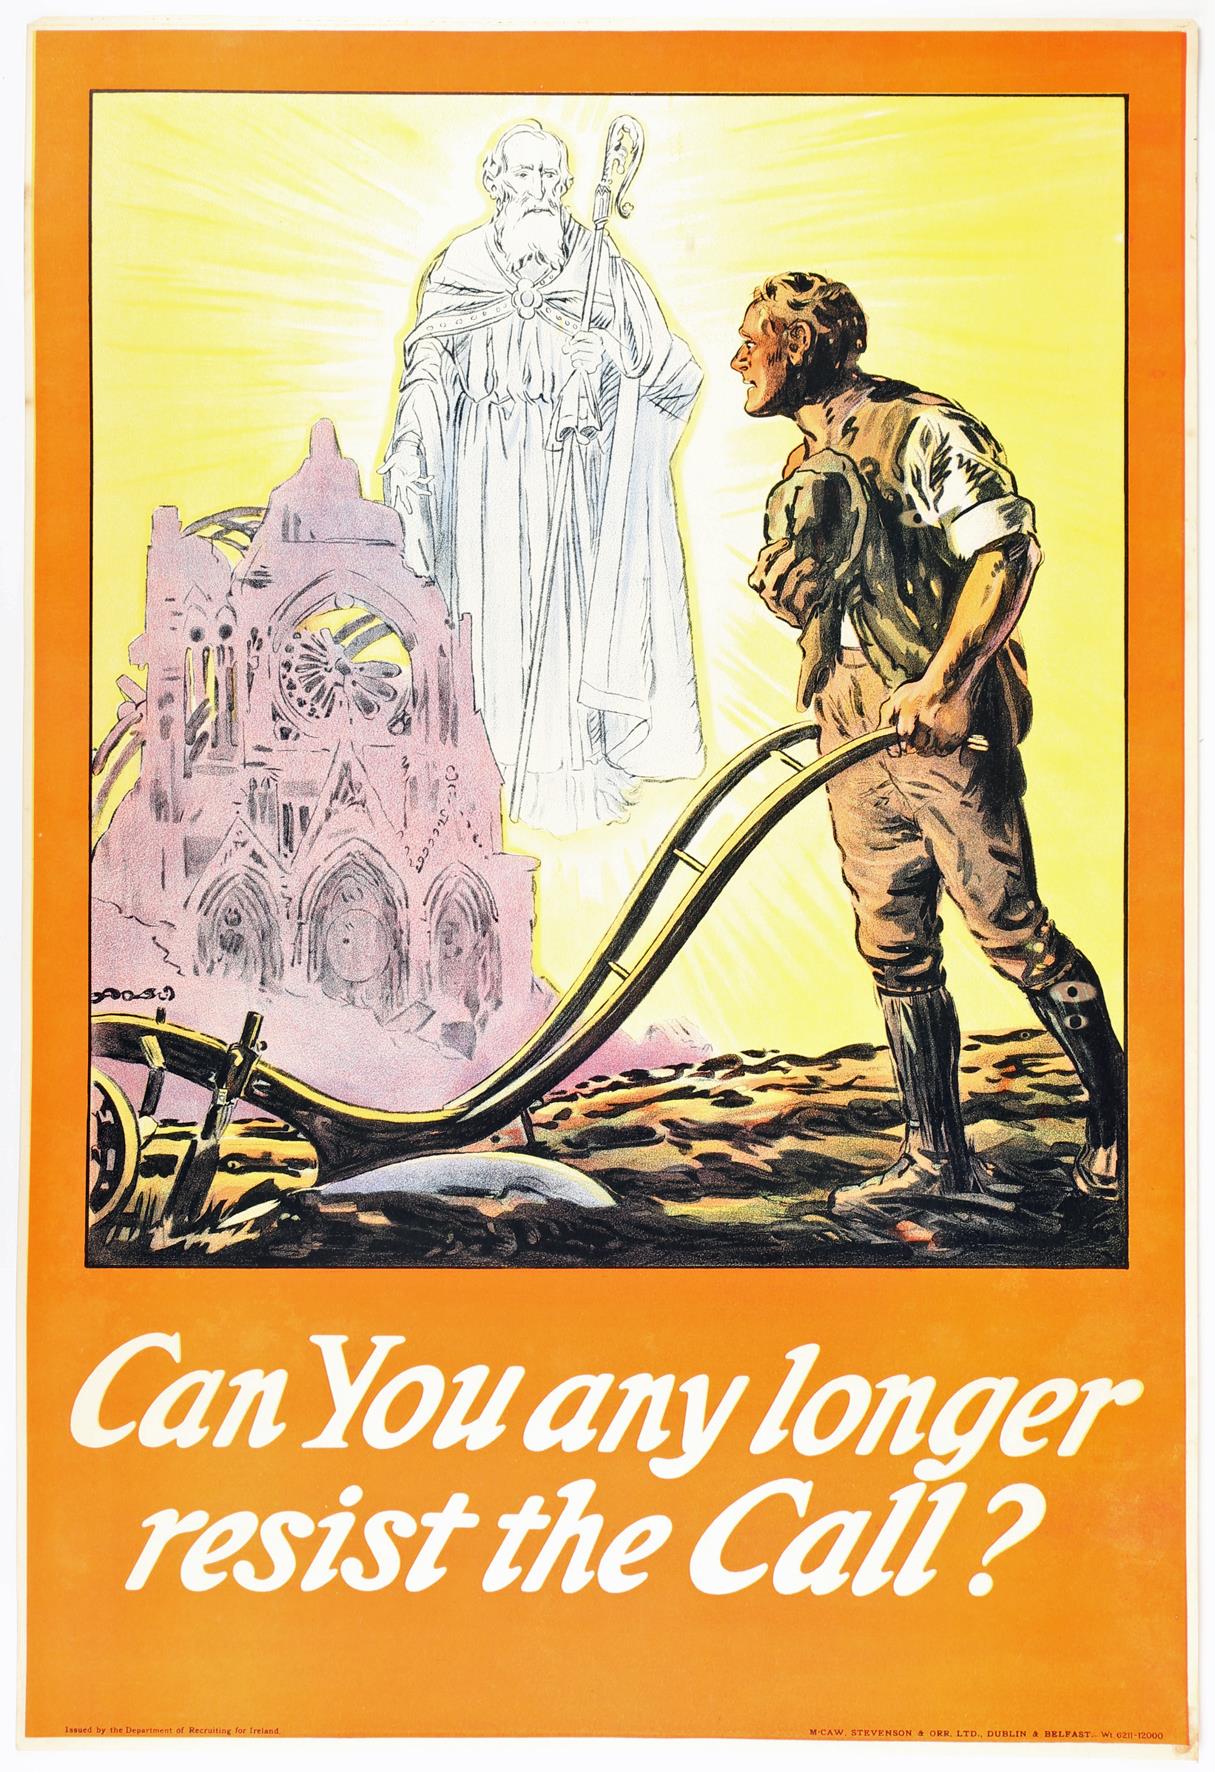 1914-18 Great War, recruiting poster issued in Ireland, "Can you any Longer Resist the Call?" Issued